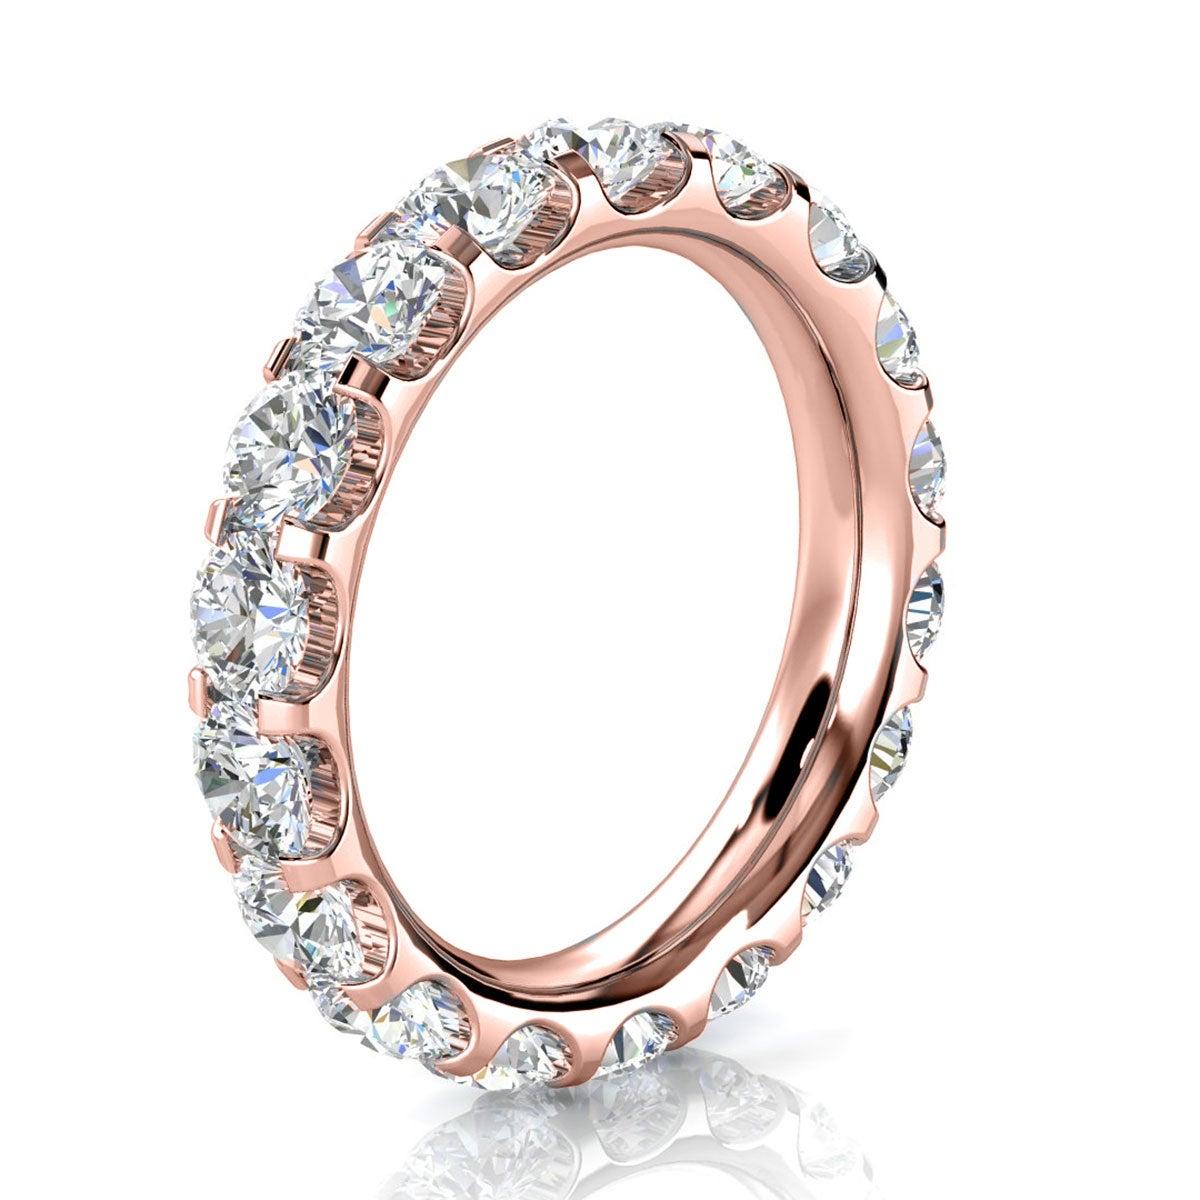 For Sale:  14k Rose Gold Viola Eternity Micro-Prong Diamond Ring '3 Ct. Tw' 2